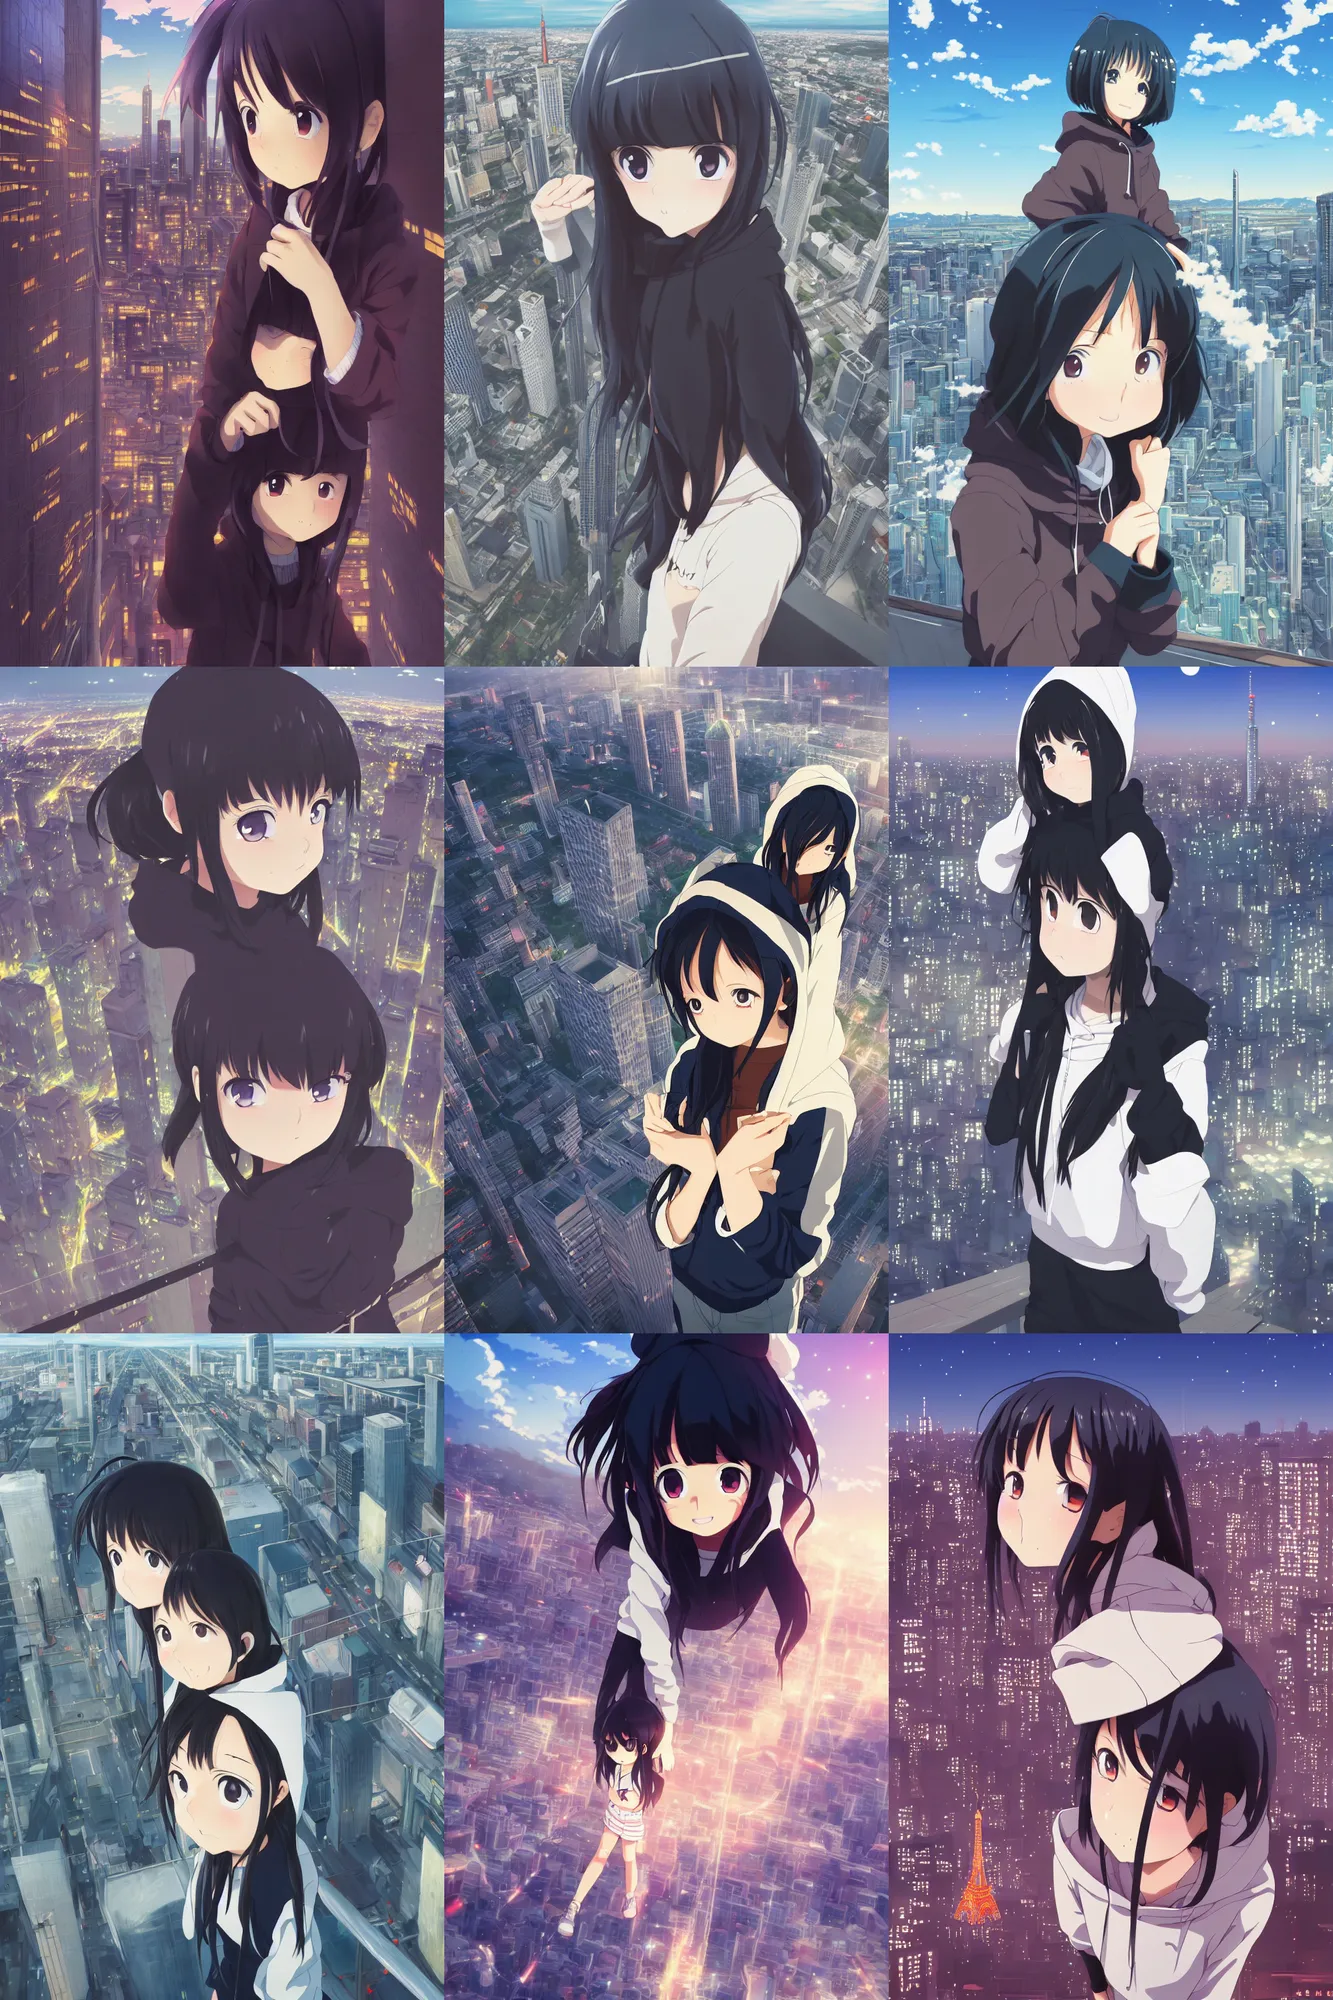 Prompt: anime visual, portrait of a young black haired girl wearing hoodie sightseeing above the urban city, guardrail, cute face by yoh yoshinari, katsura masakazu, dramatic lighting, dynamic perspective, strong silhouette, ilya kuvshinov, anime cels, 1 8 mm lens, fstop of 8, rounded eyes, moody, detailed